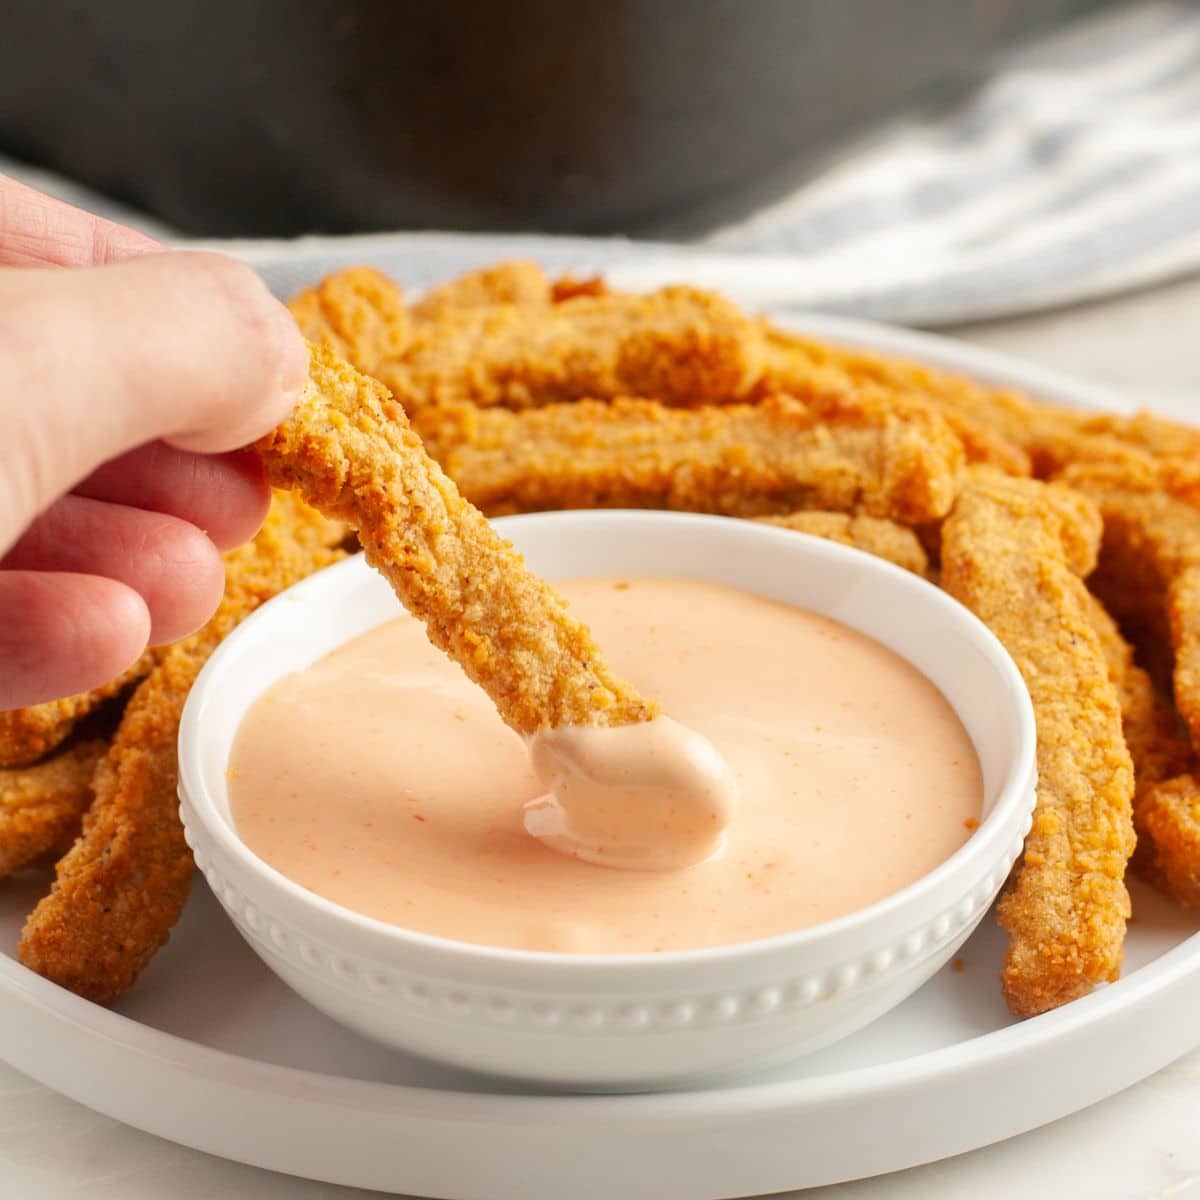 Chicken fry dipping into a bowl of sauce.